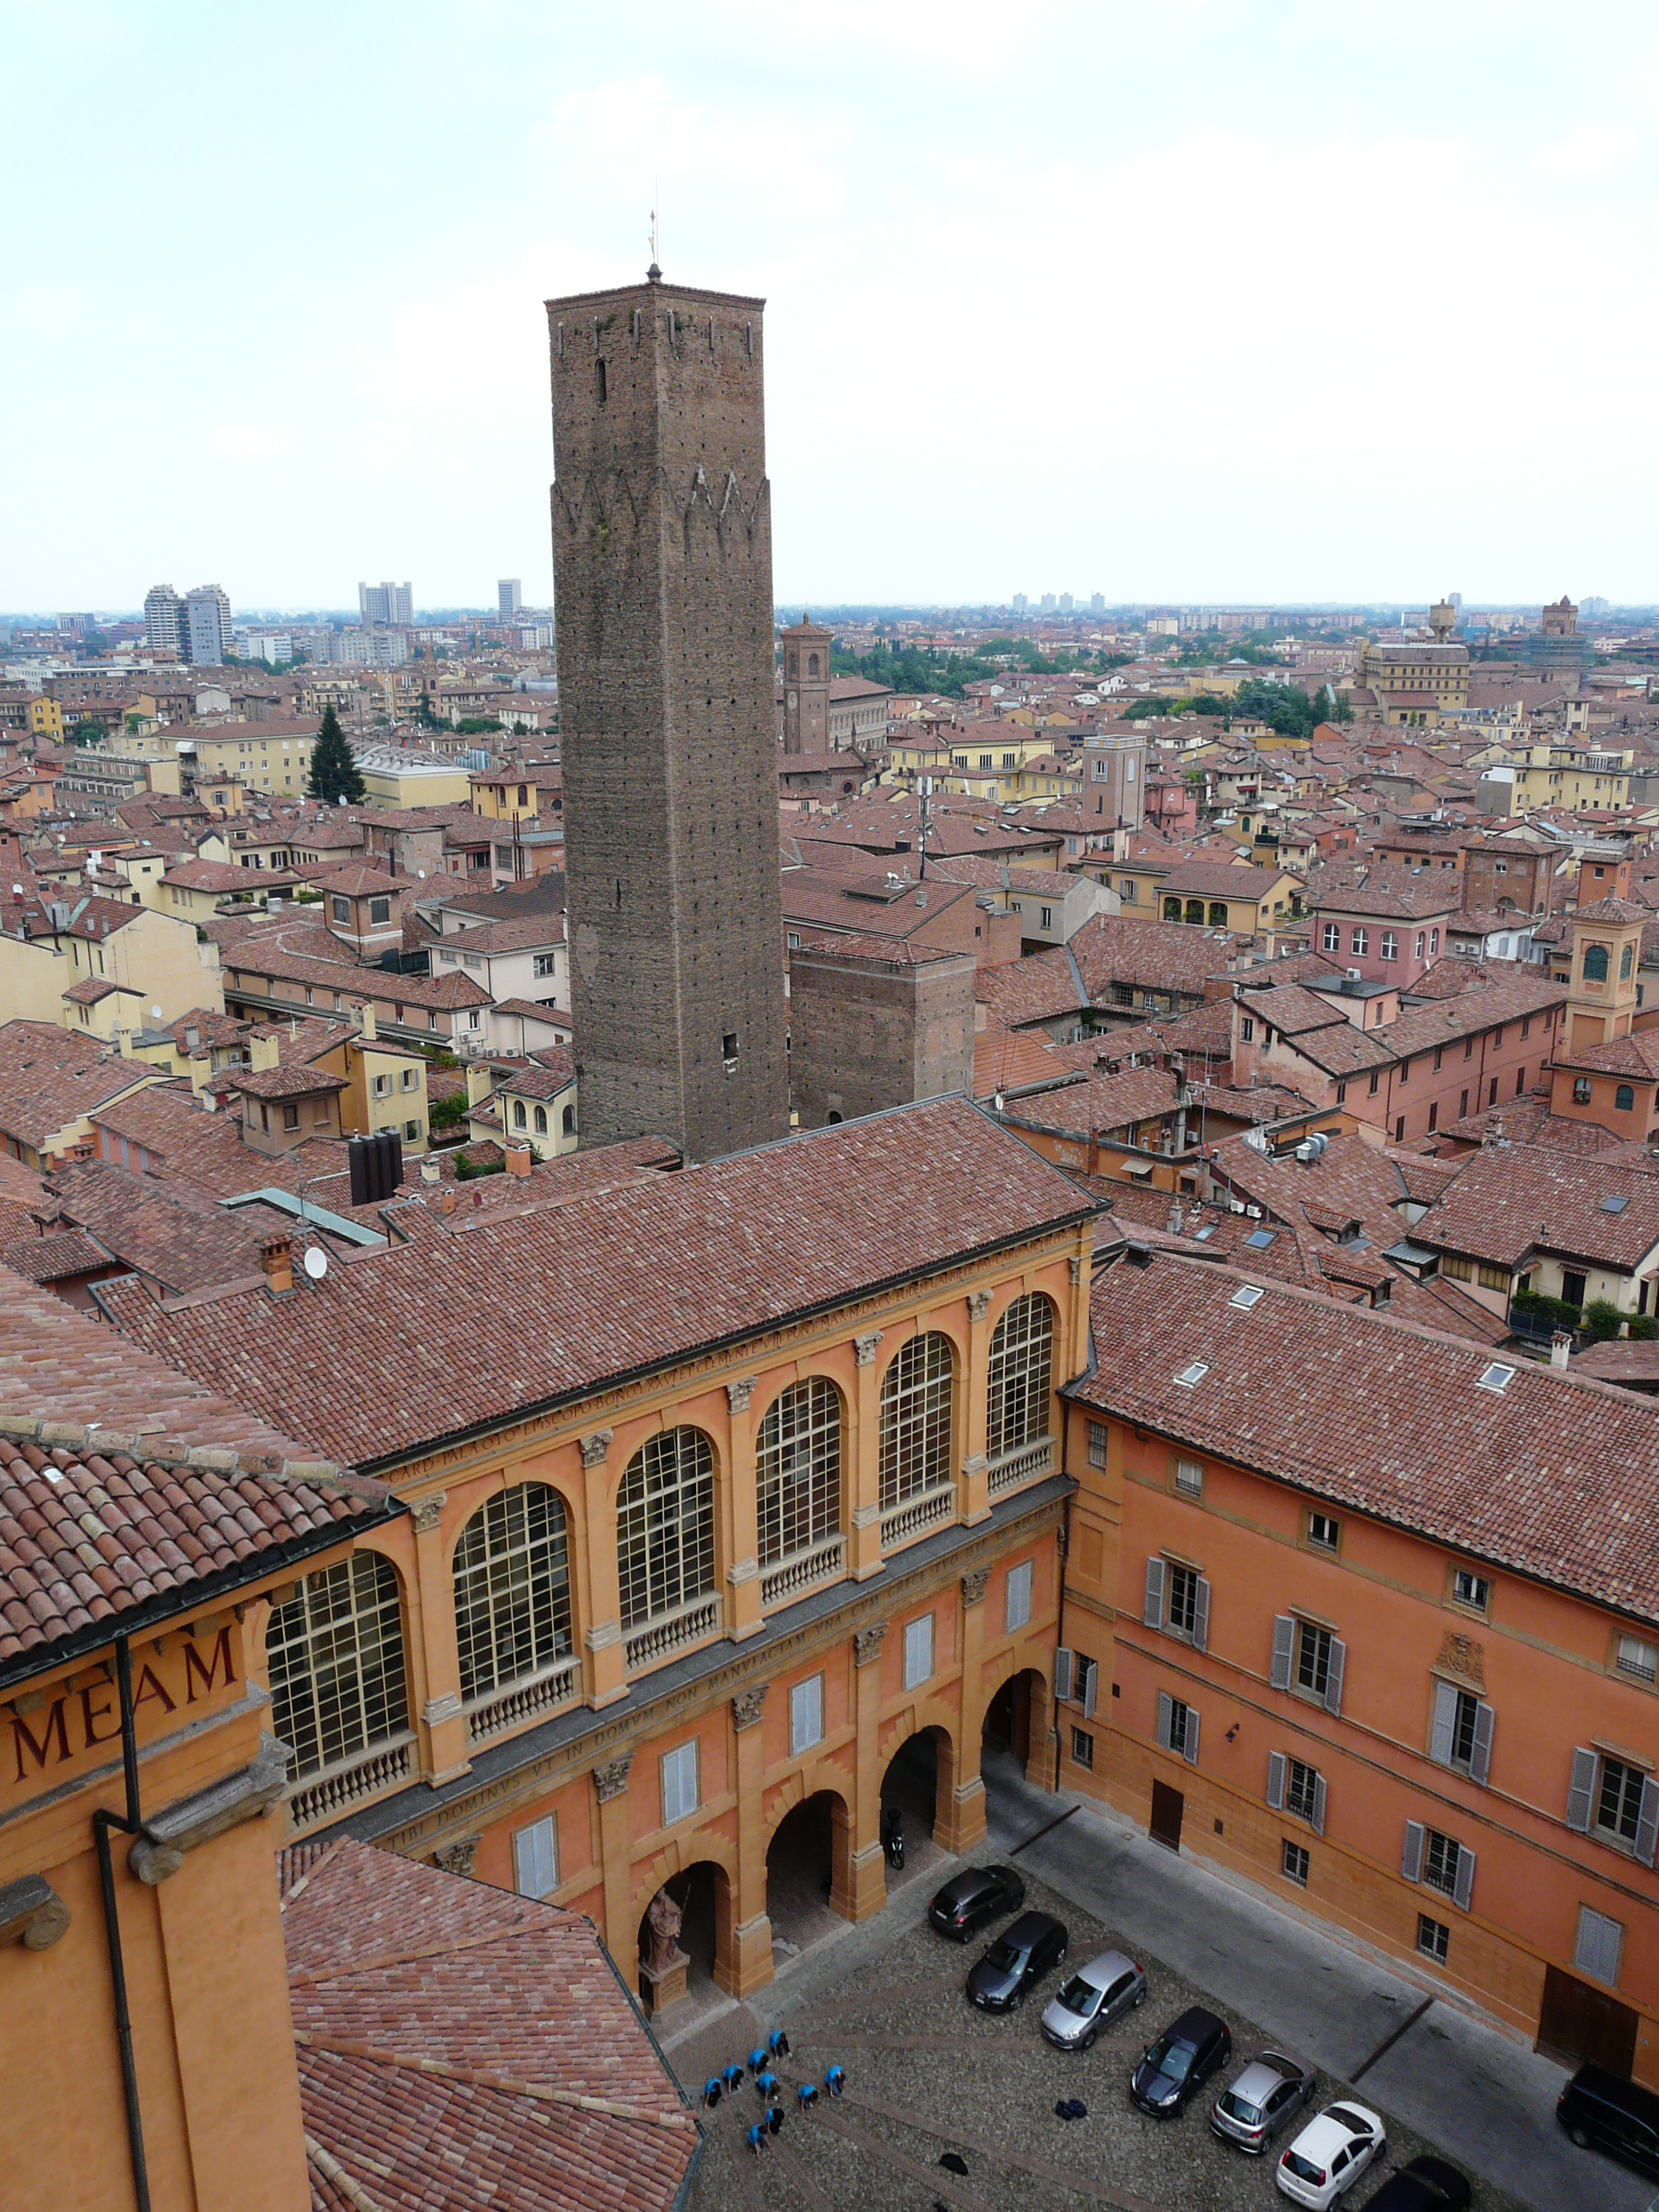 The Best of Bologna - Torre Prendiparte